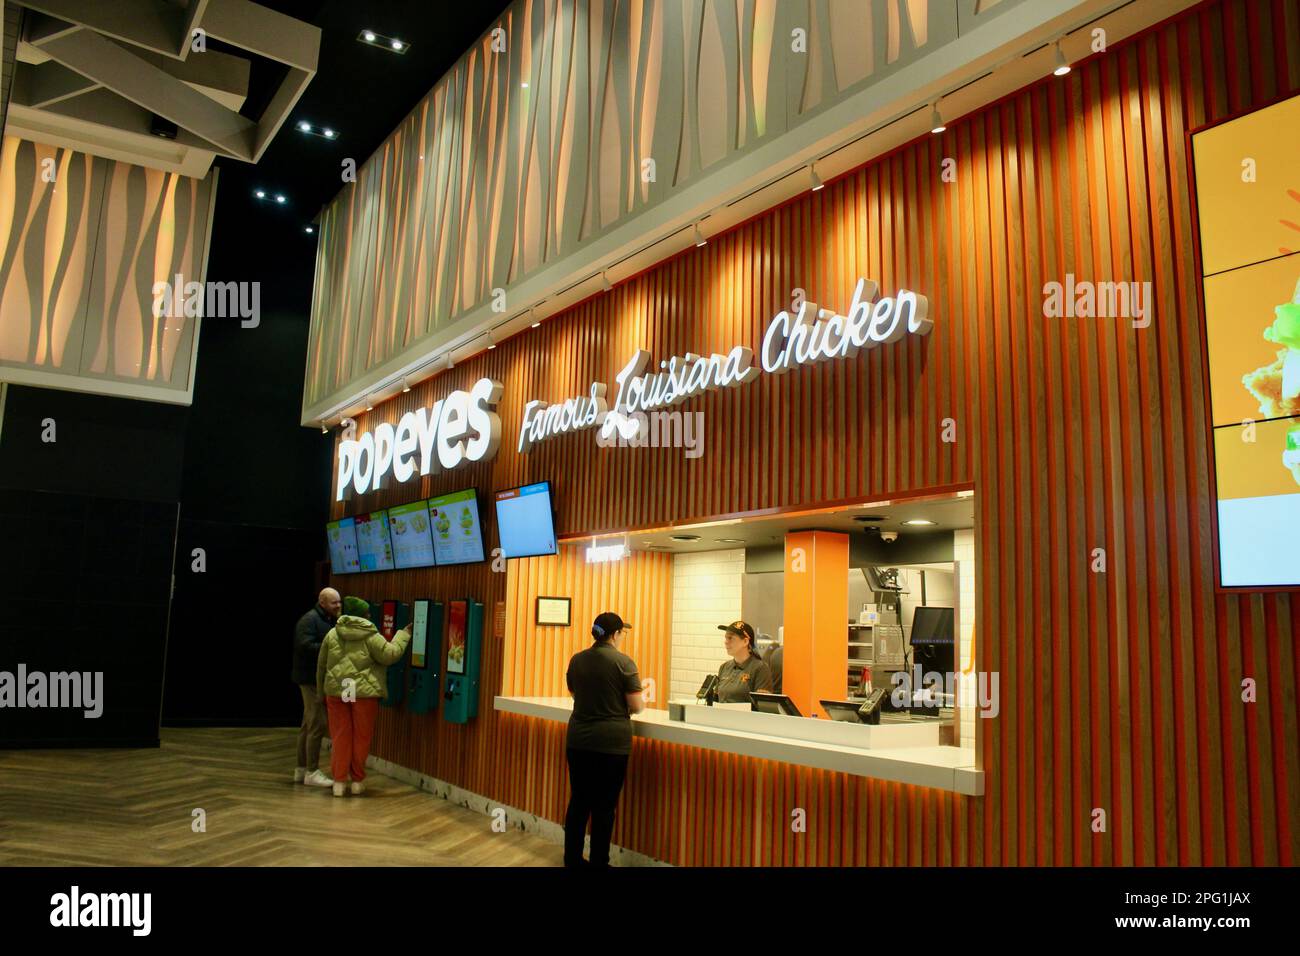 popeyes chicken concession among the restaurants and food outlets inside derbion shopping centre derby england uk Stock Photo